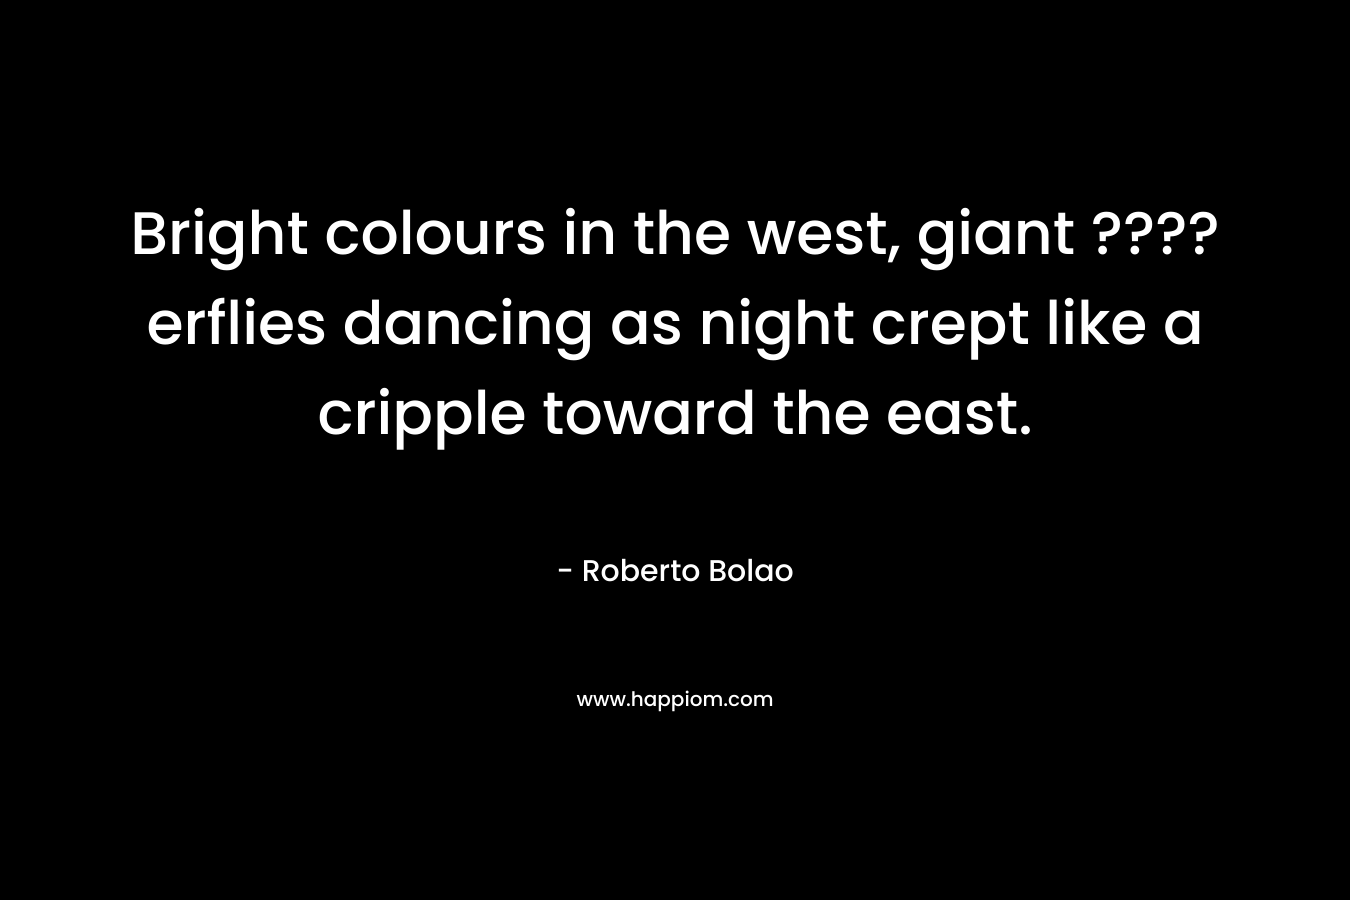 Bright colours in the west, giant ????erflies dancing as night crept like a cripple toward the east. – Roberto Bolao